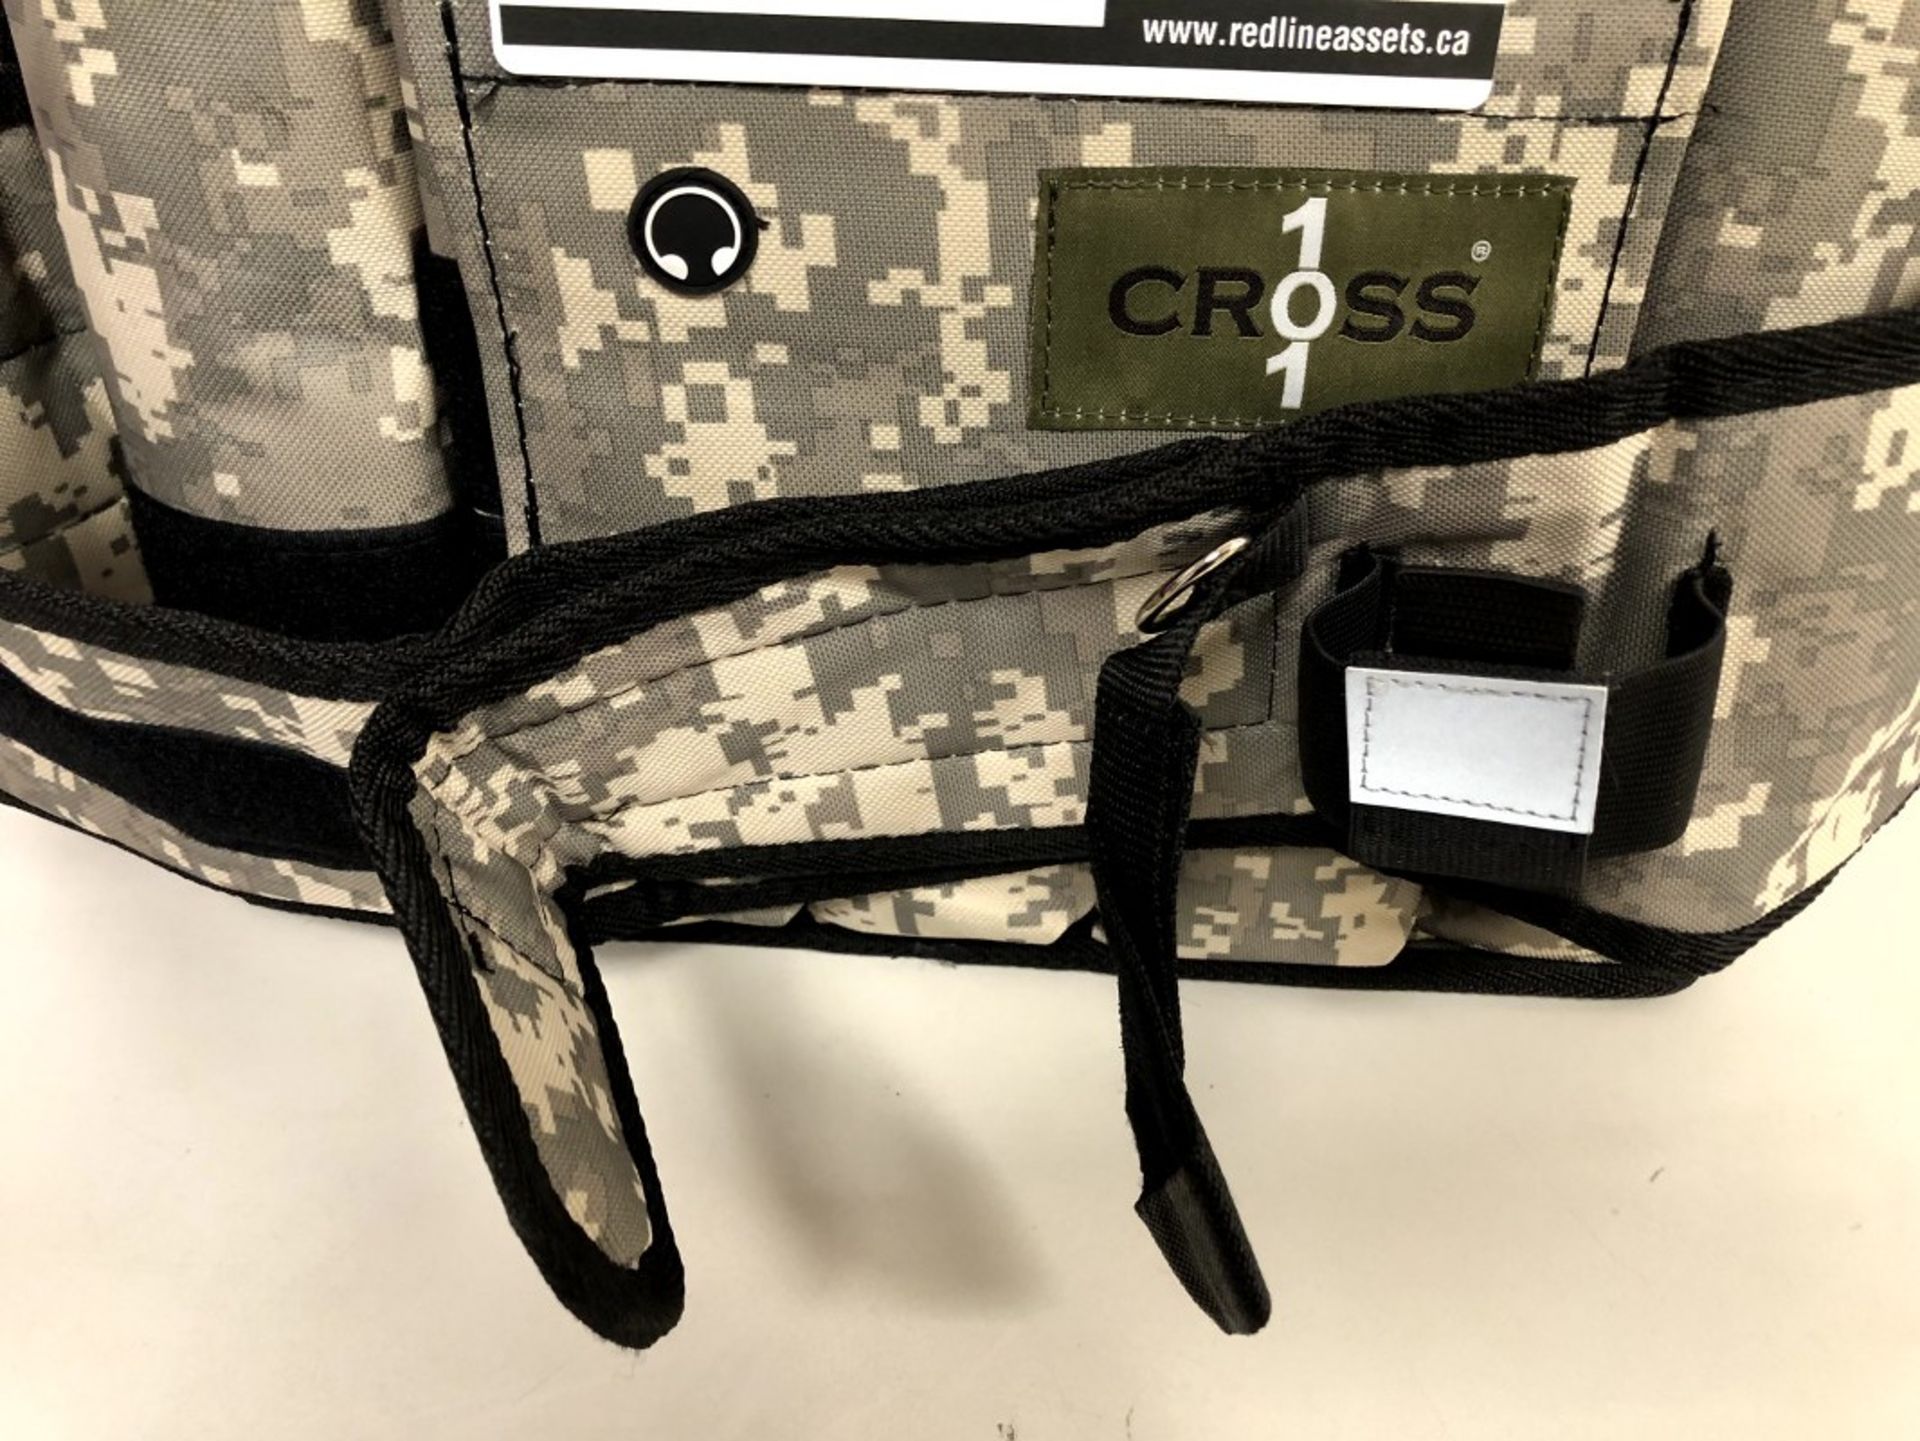 Cross 1 - Weighted 50Lbs Camoflauge Vest - Image 2 of 2